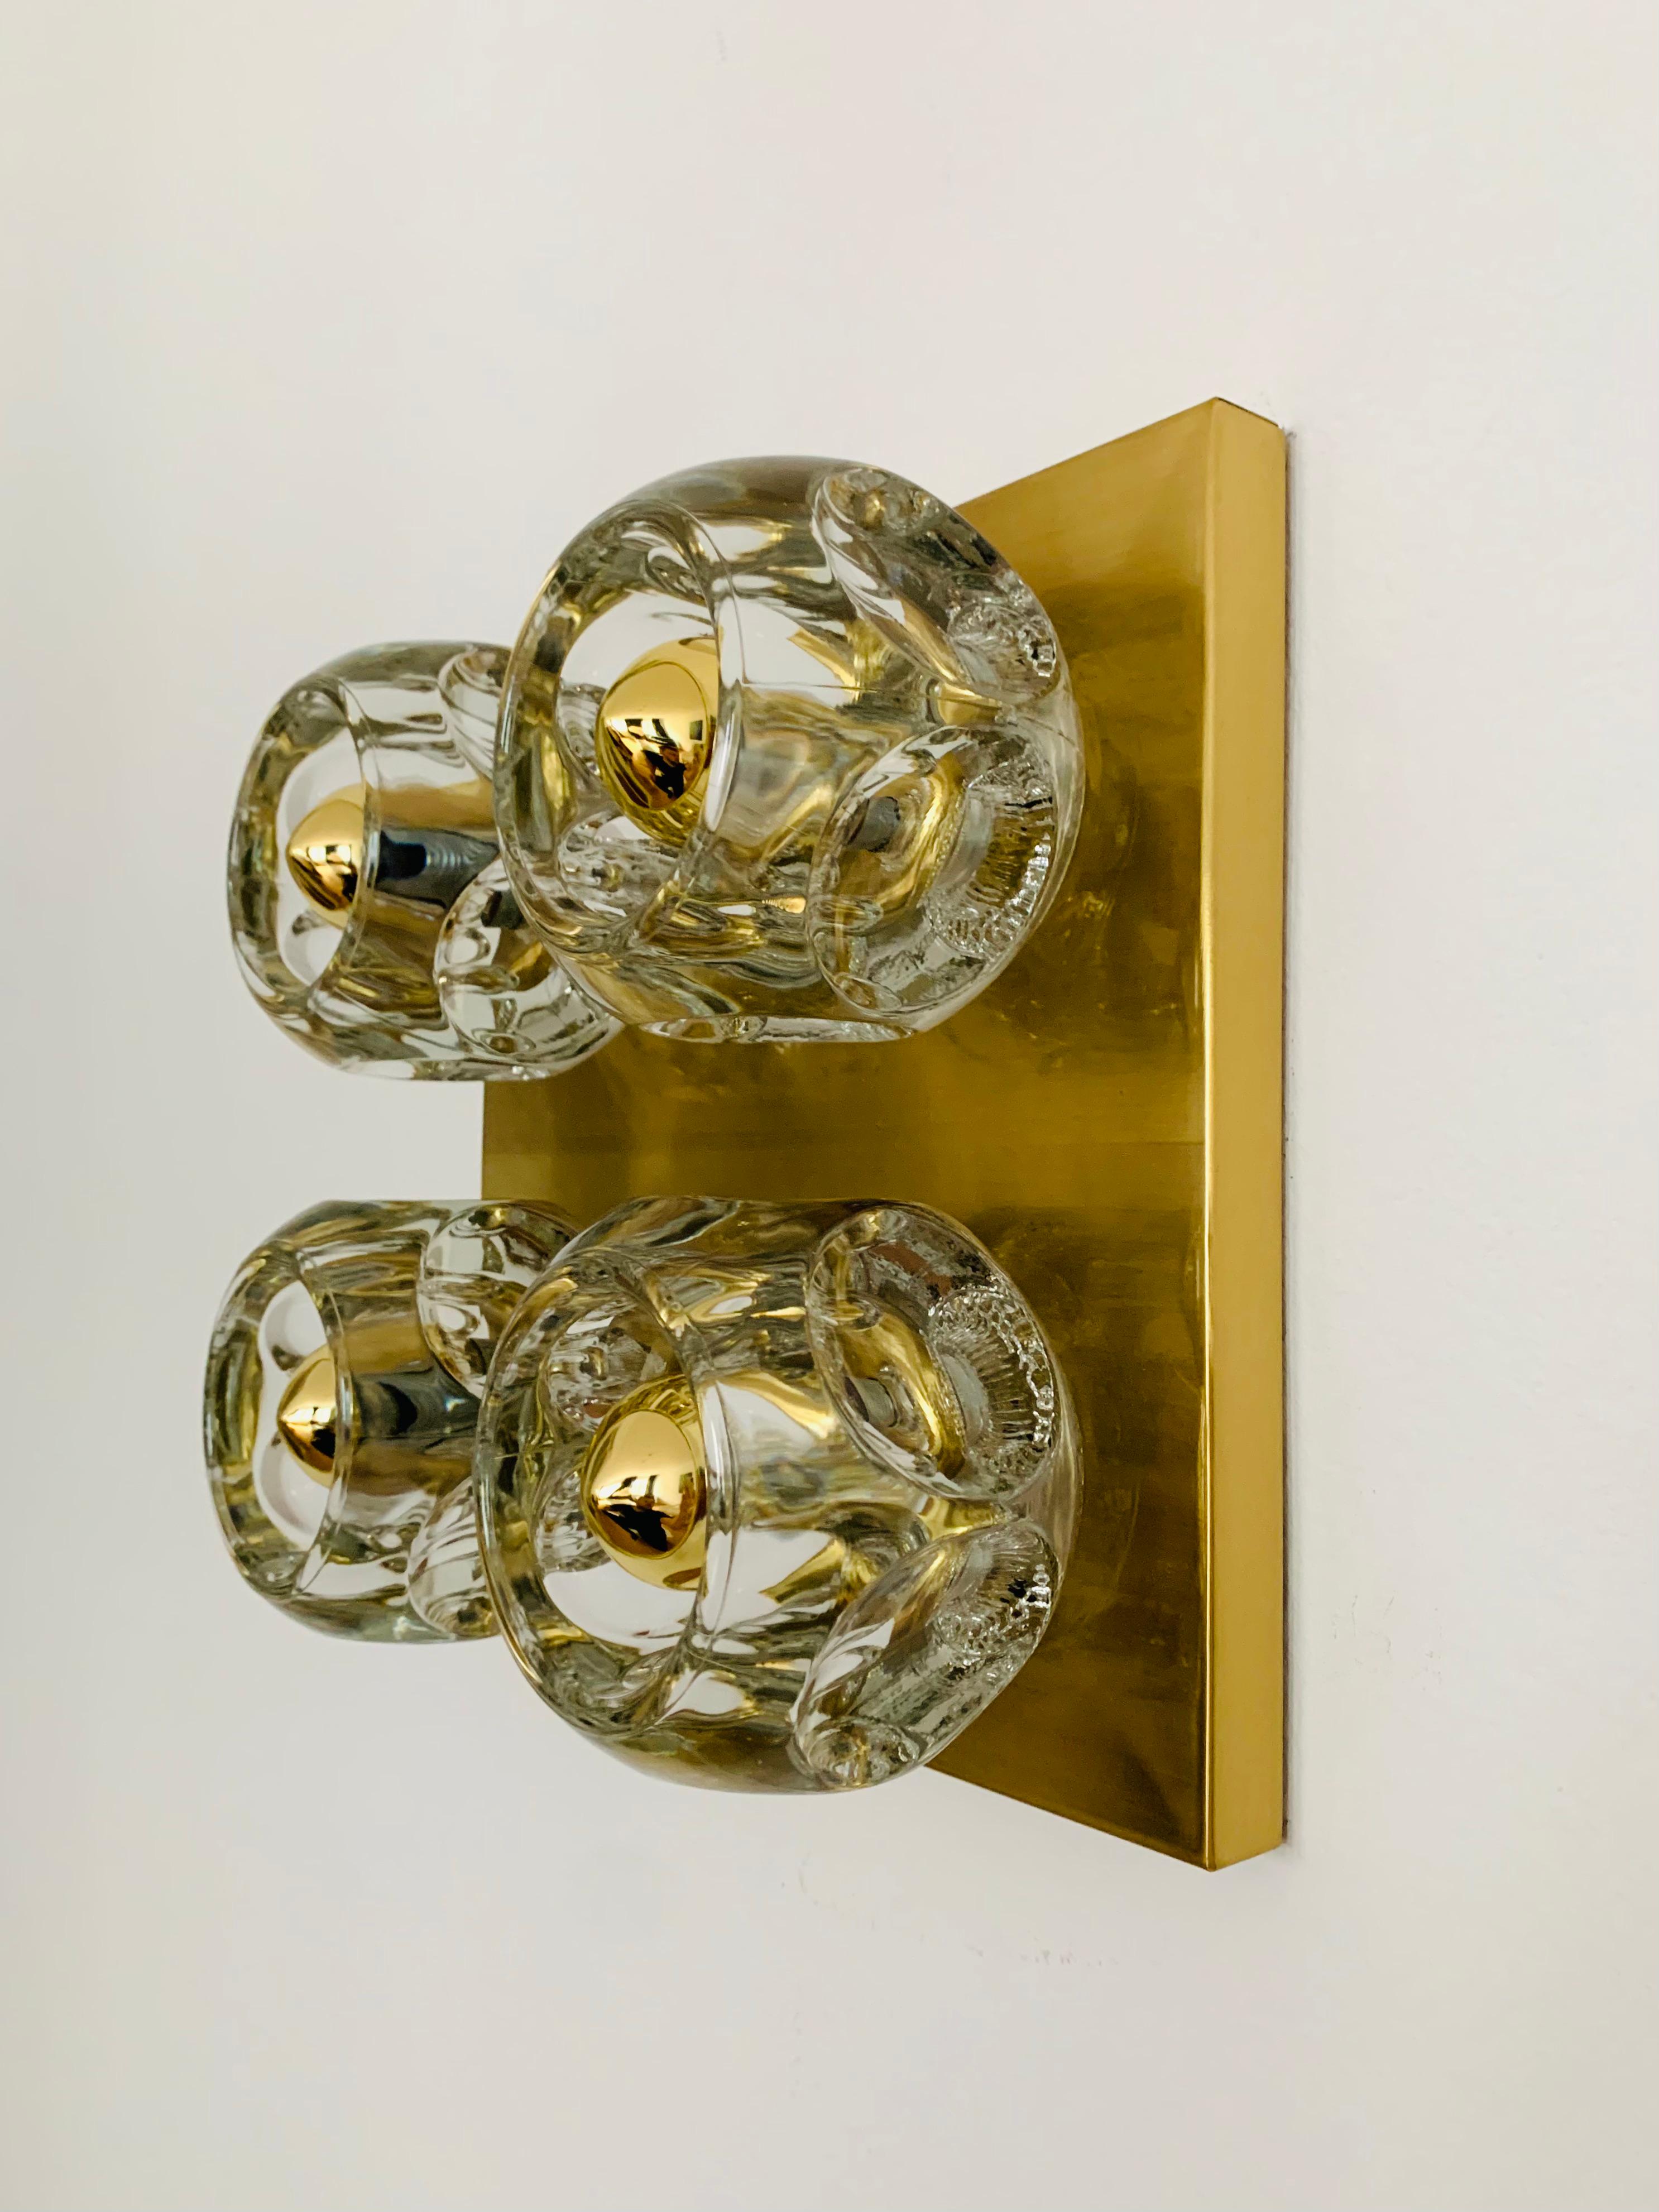 Fantastic ice cube wall lamp or ceiling lamp by Peill and Putzler from the 1960s.
Very nice design and shape which spreads a great play of light in the room.

Condition:

Very good vintage condition with slight signs of wear consistent with